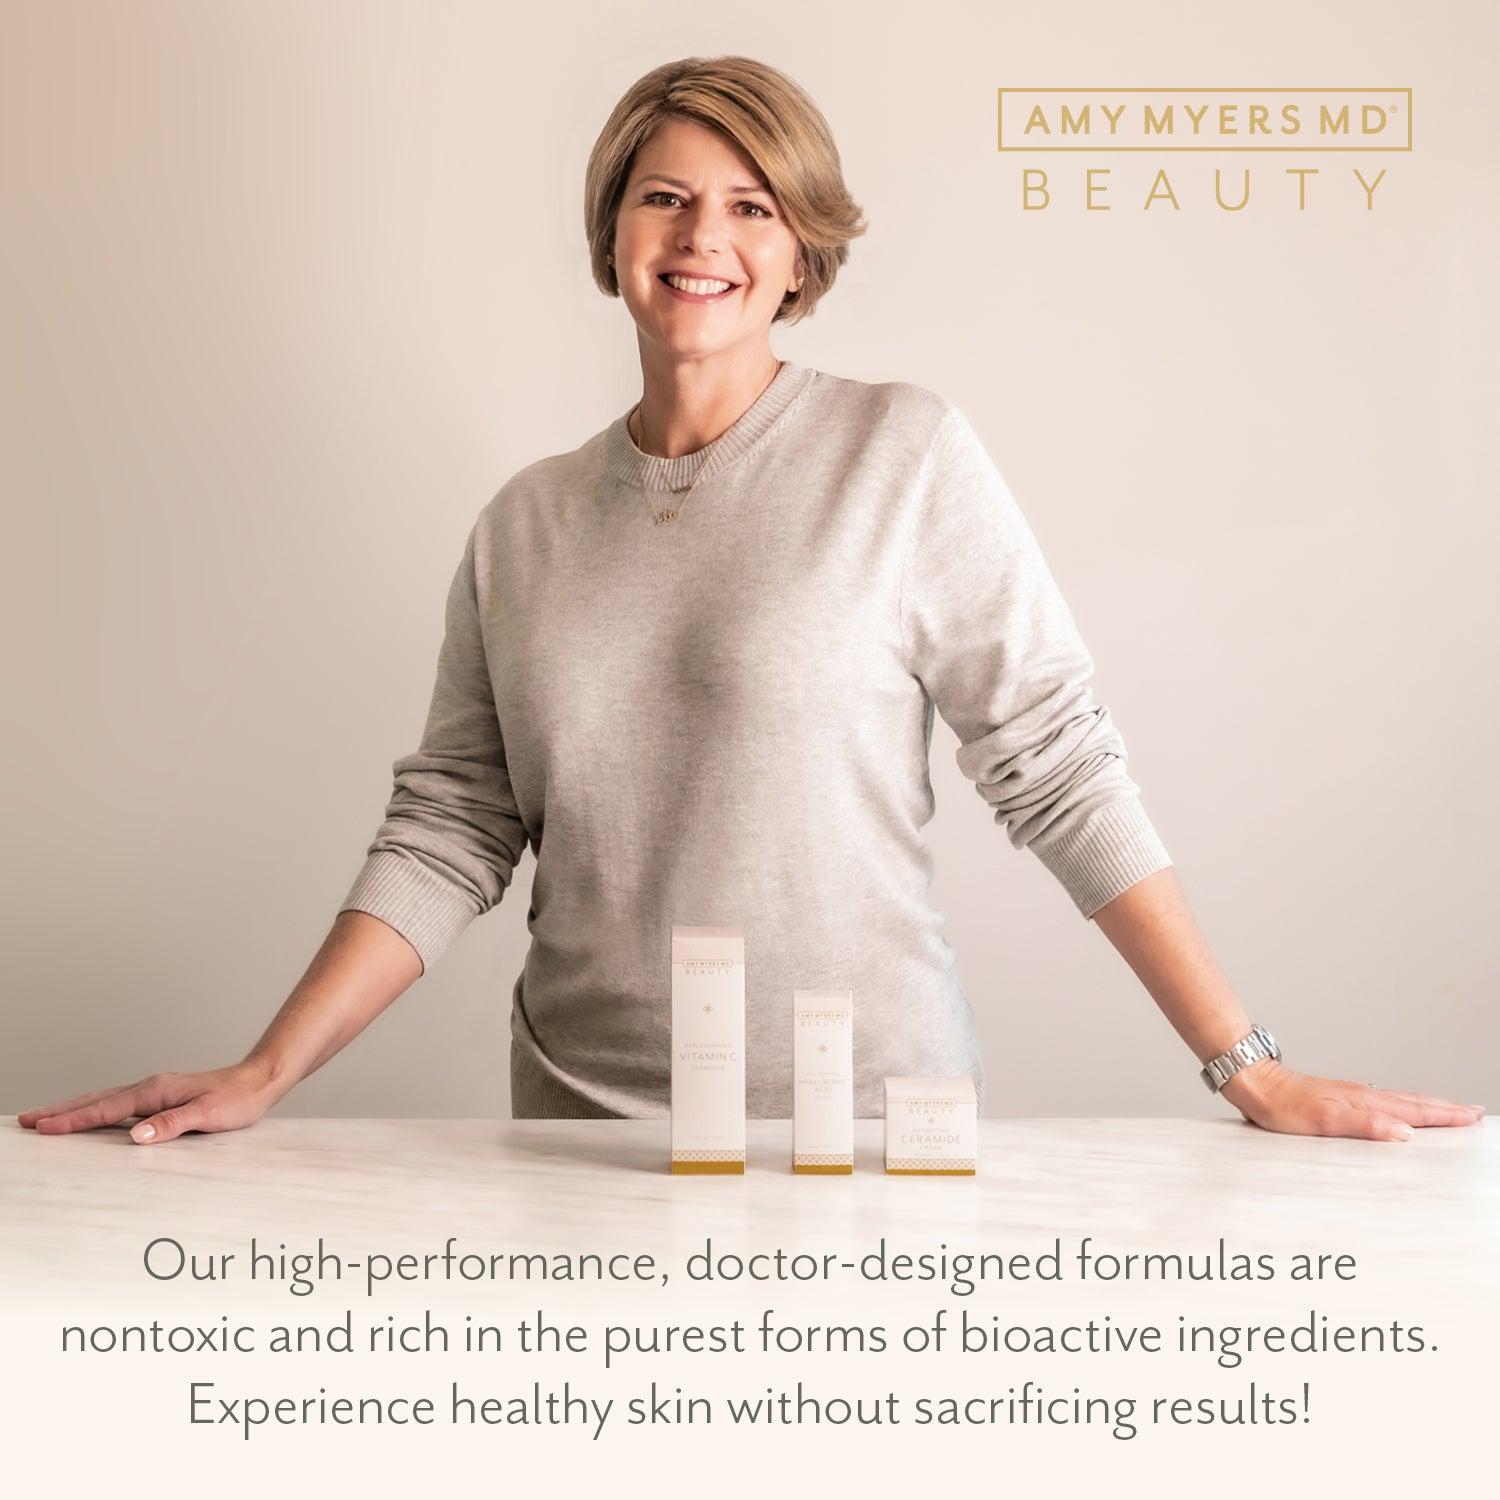 Dr. Amy Myers and her beauty and skincare products - Amy Myers MD®